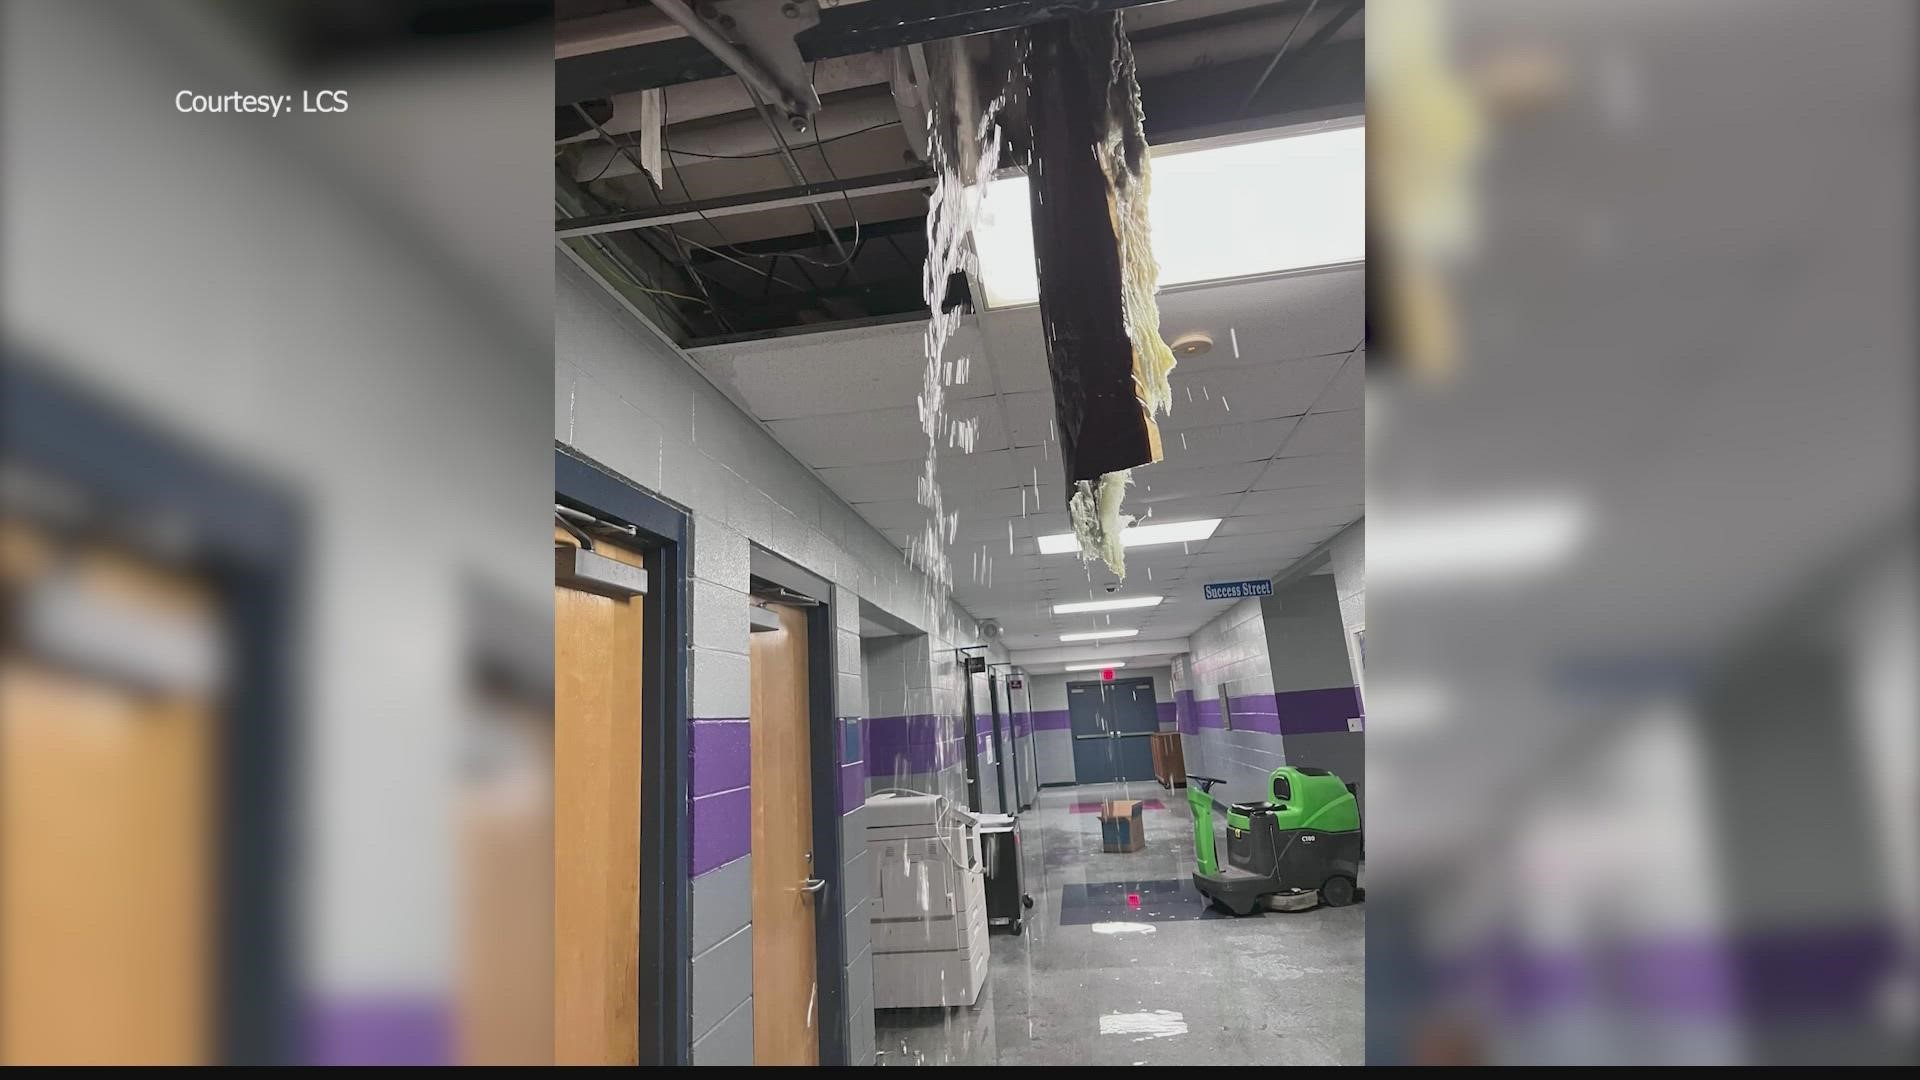 Freezing temperatures caused pipes to burst at four Limestone County Schools.